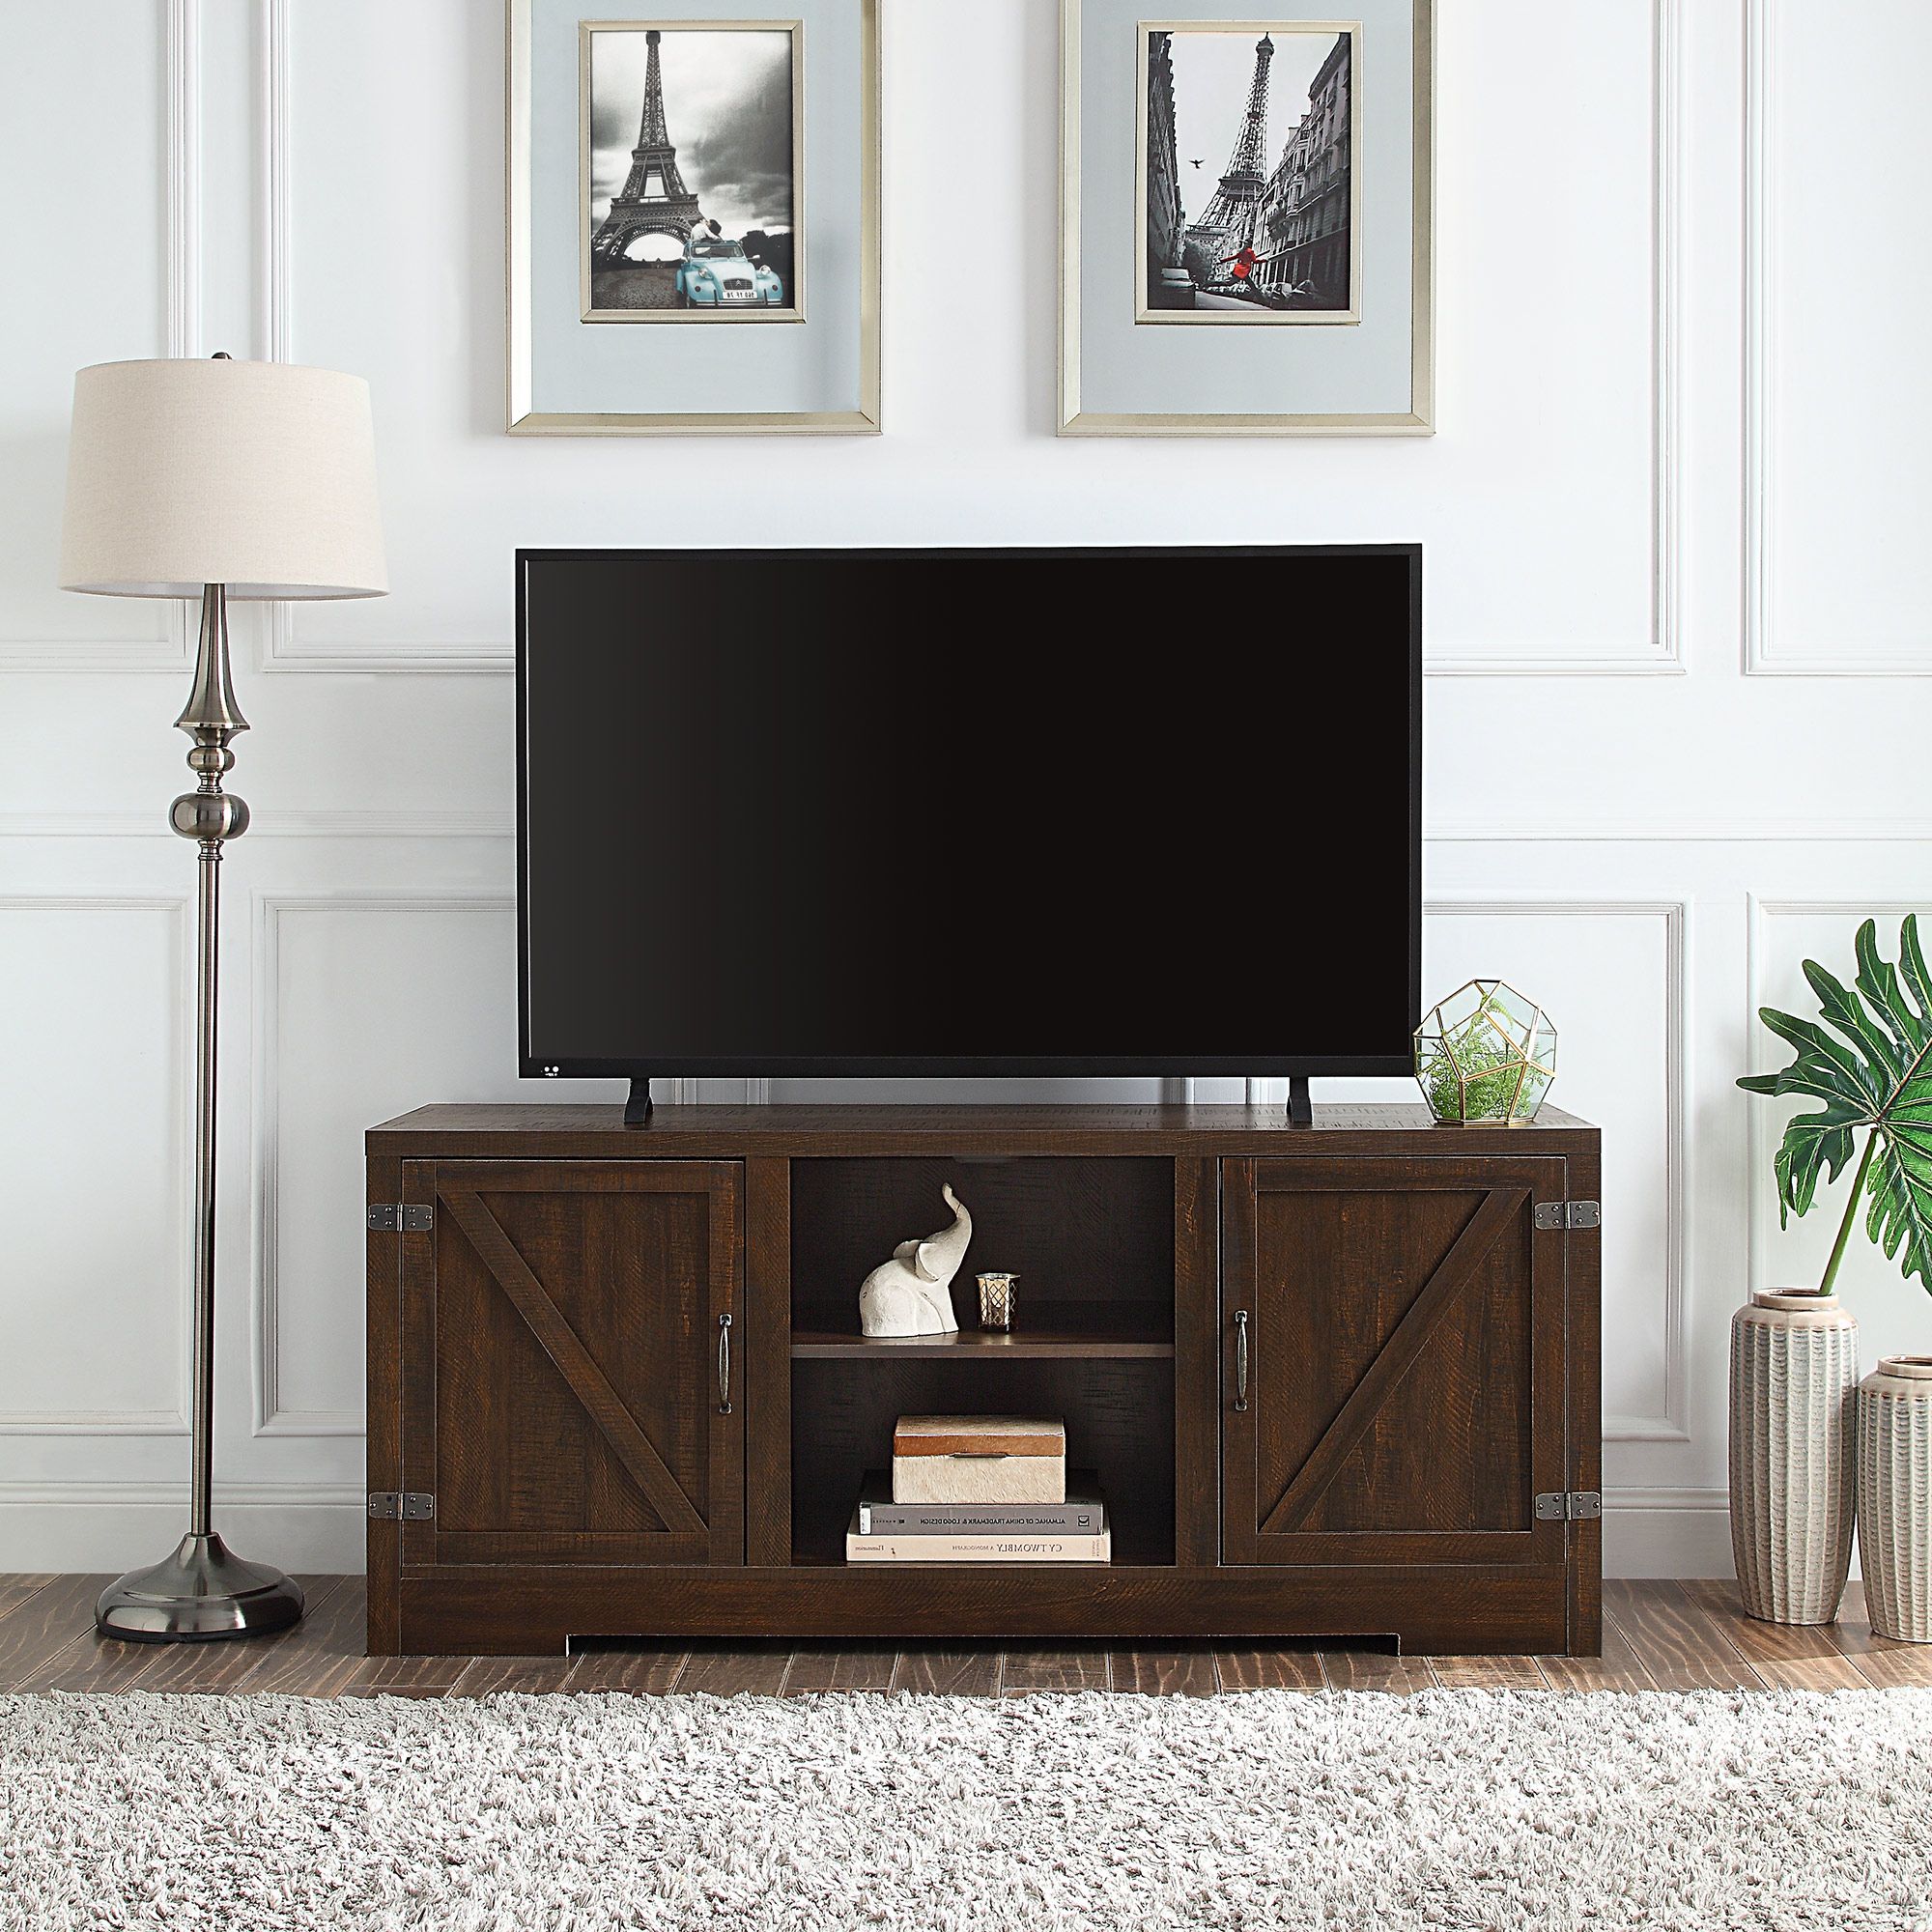 Belleze Hilo 58 Inch Barn Door Tv Stand Console For Tvs Up Pertaining To Kamari Tv Stands For Tvs Up To 58" (Gallery 10 of 20)